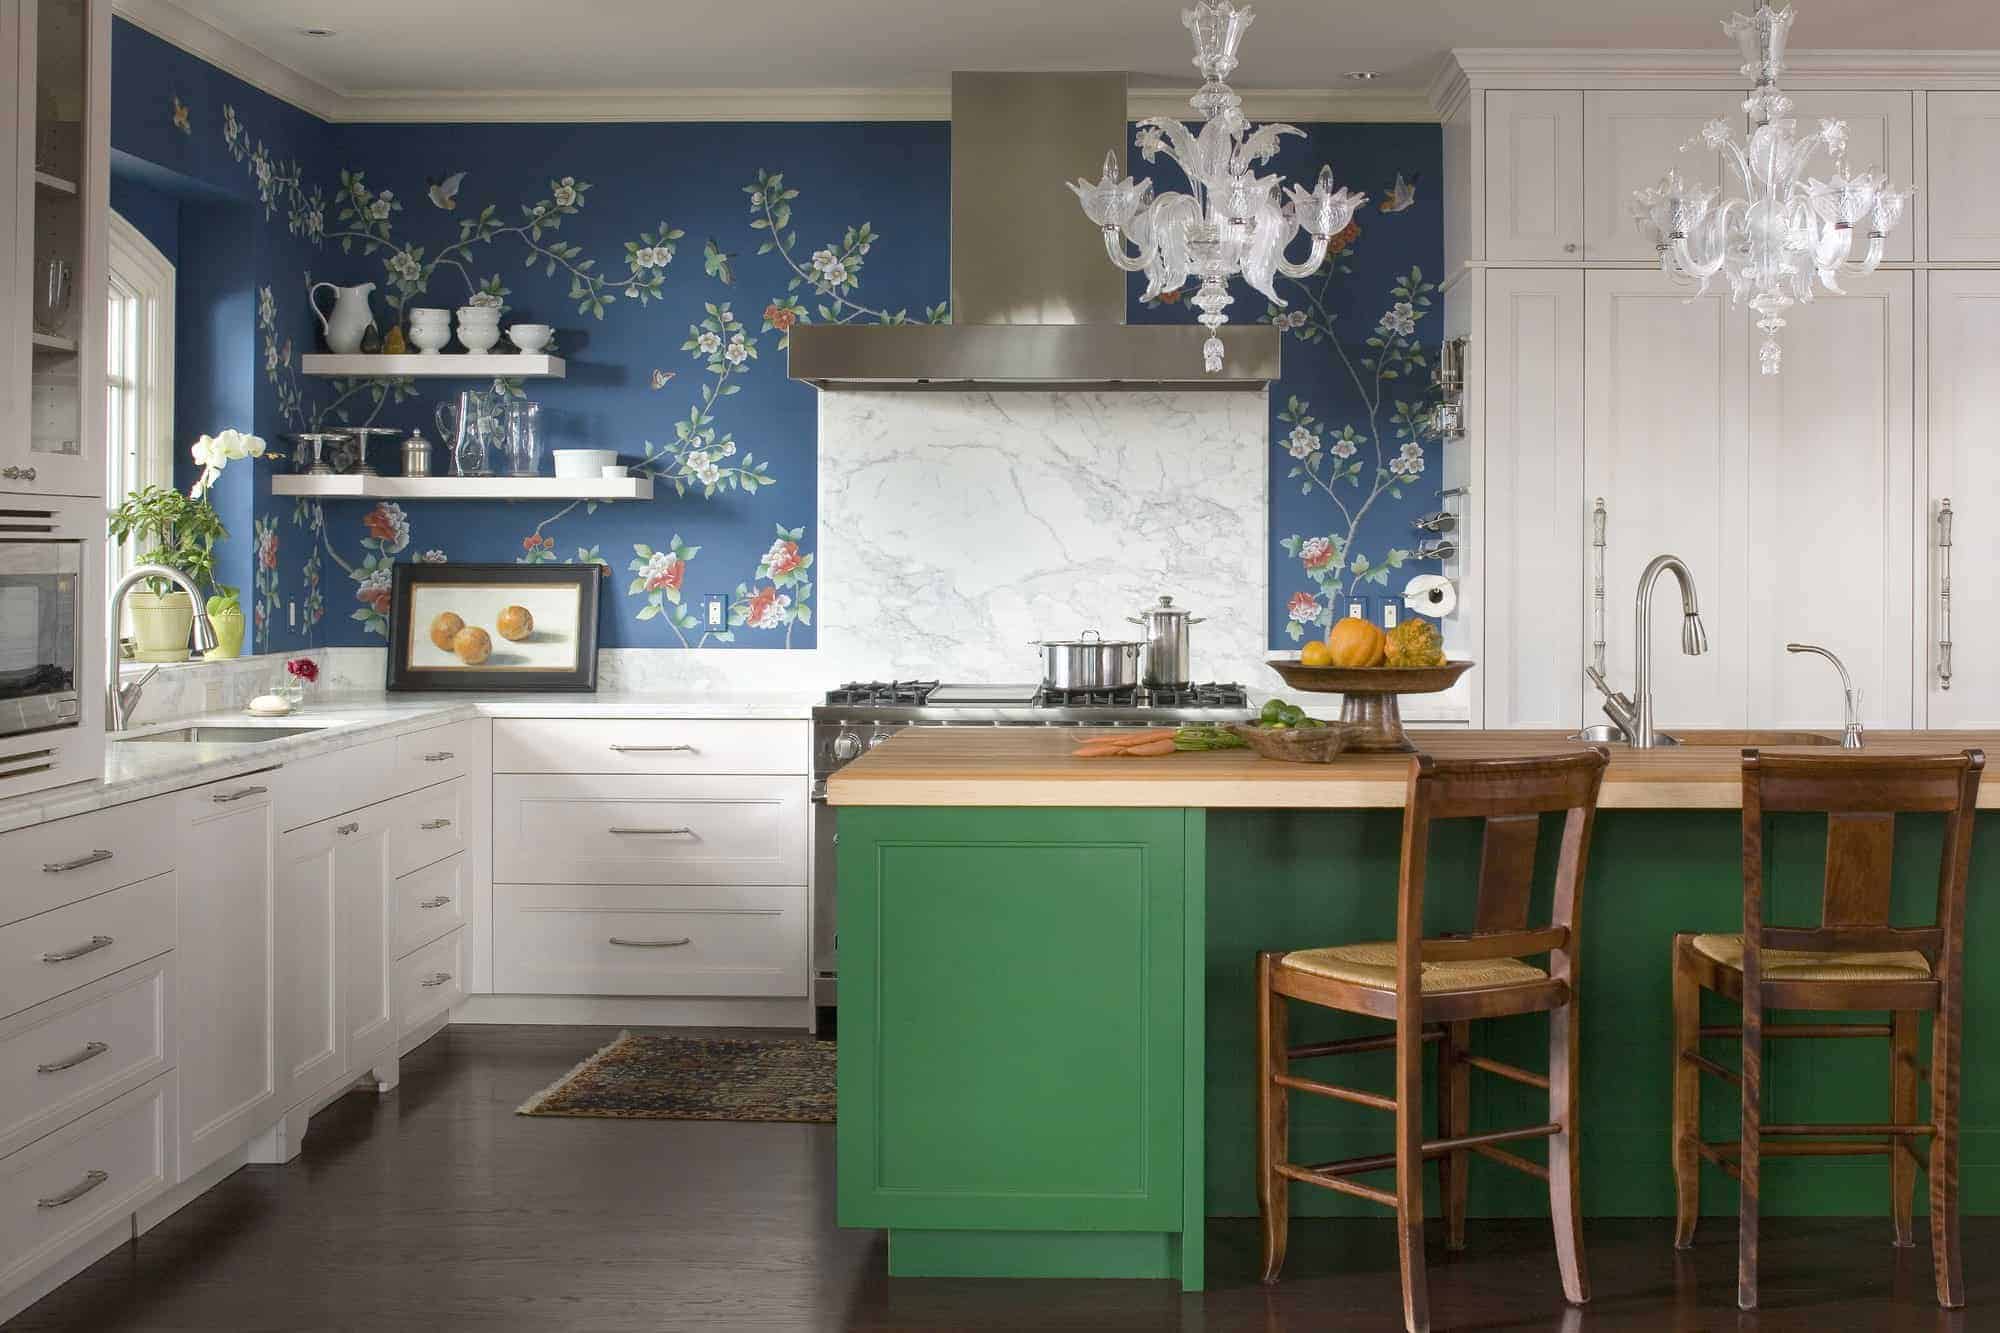 Beautiful wallpaper and green island in redesigned kitchen